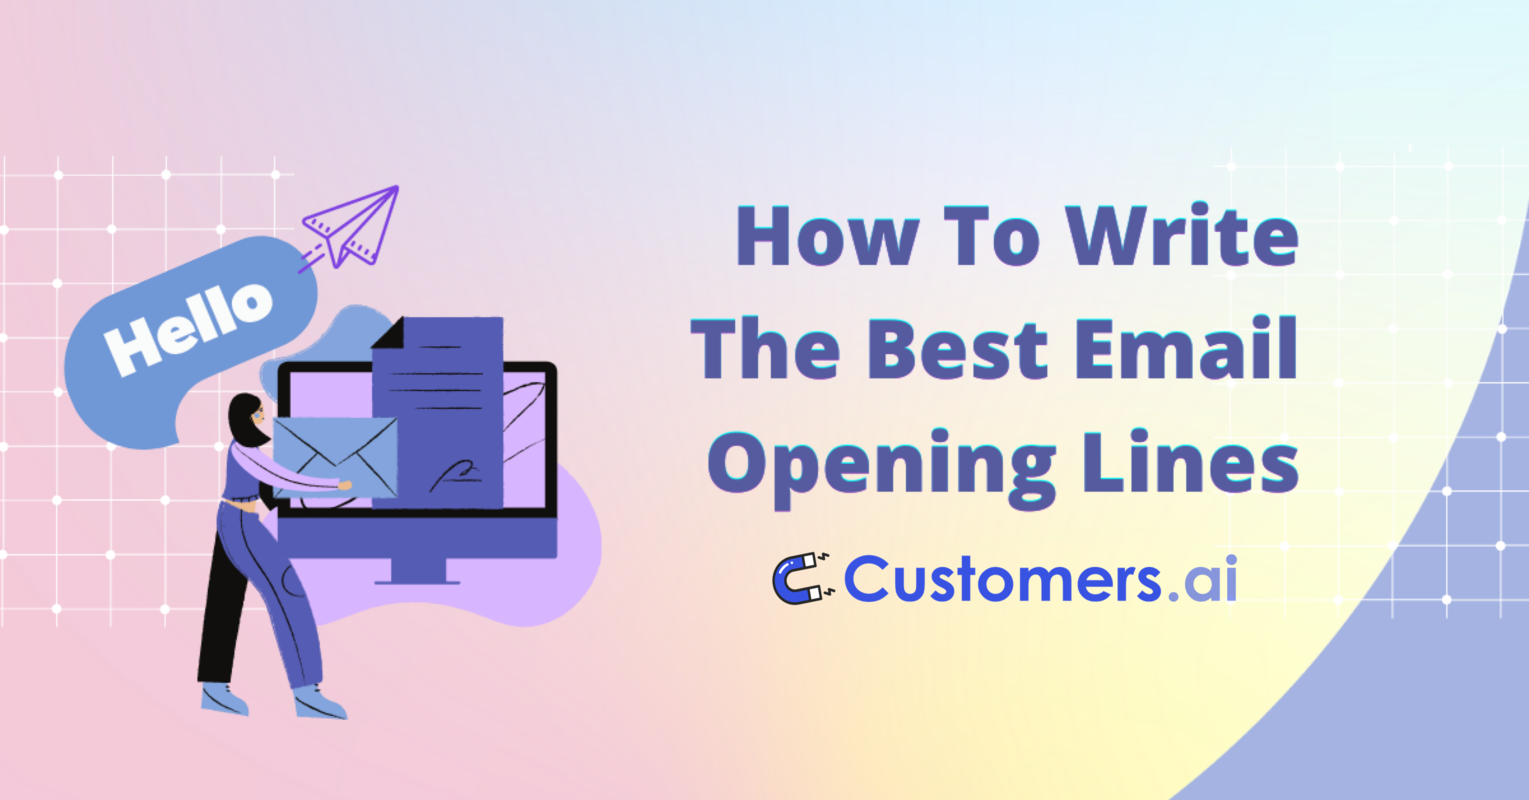 https://customers.ai/wp-content/uploads/2021/03/how-to-write-the-best-email-opening-lines.png